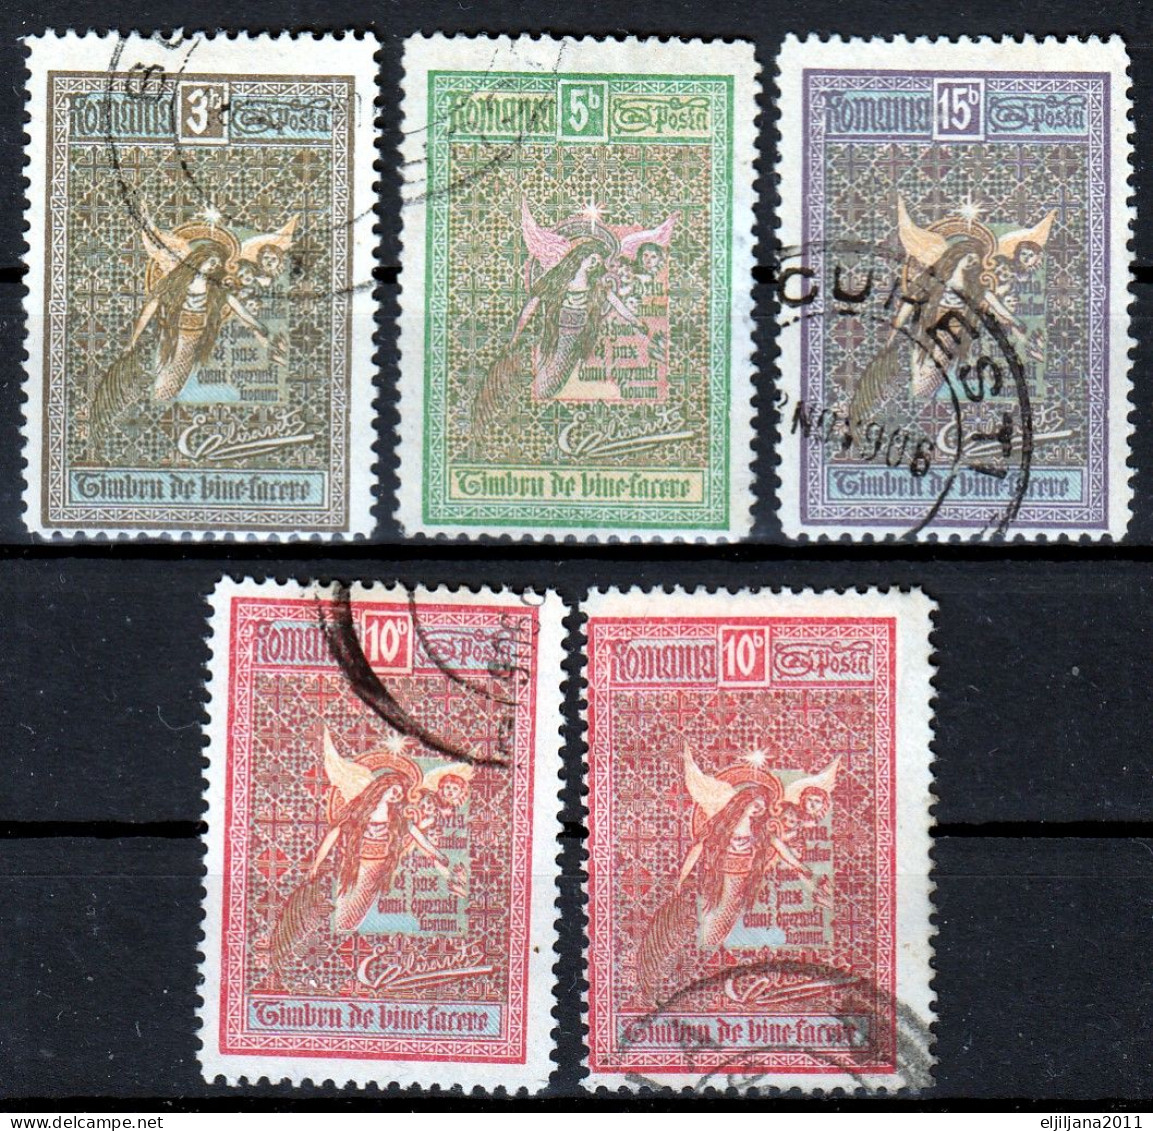 ⁕ Romania 1906 ⁕ Wohlfahrt Mi.173-176 Charity Issue ⁕ 5v Used - Used Stamps